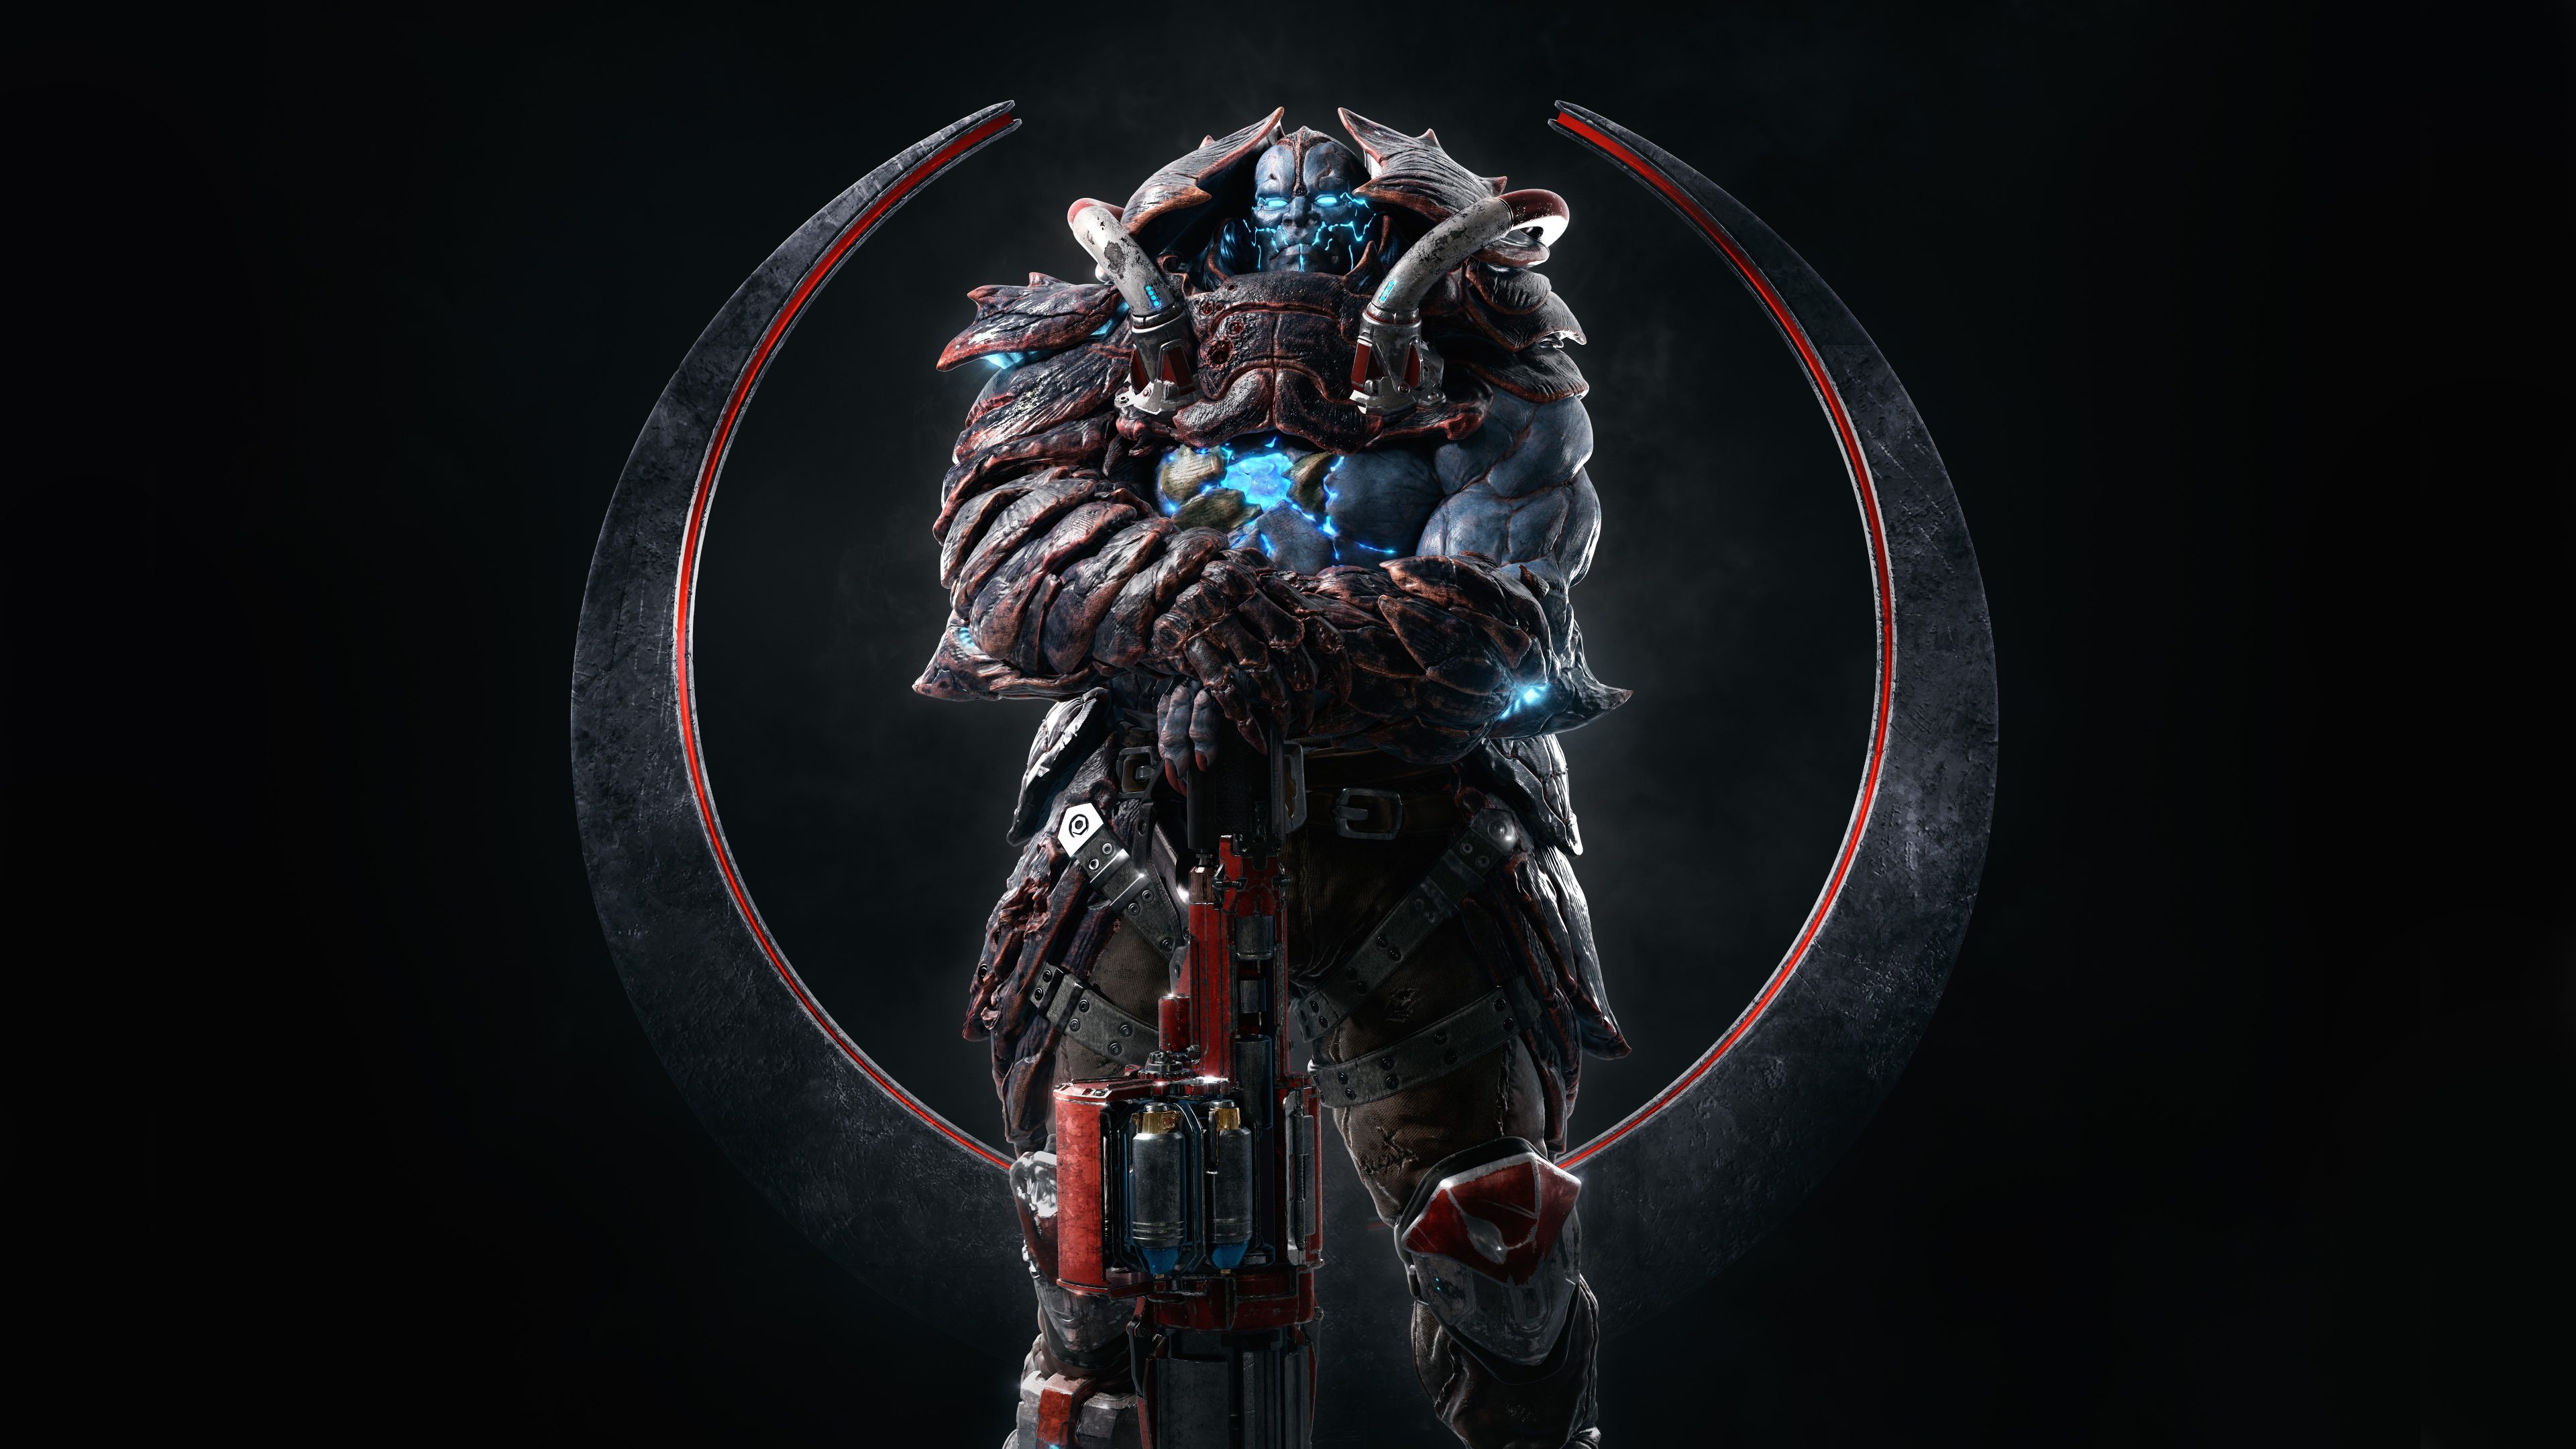 Scale Bearer Quake Champion 4k 8k Hd Wallpaper Background A collection of the top 24 8k 7680x4320 ultra hd resolution desktop wallpapers and backgrounds available for download for free. scale bearer quake champion 4k 8k hd